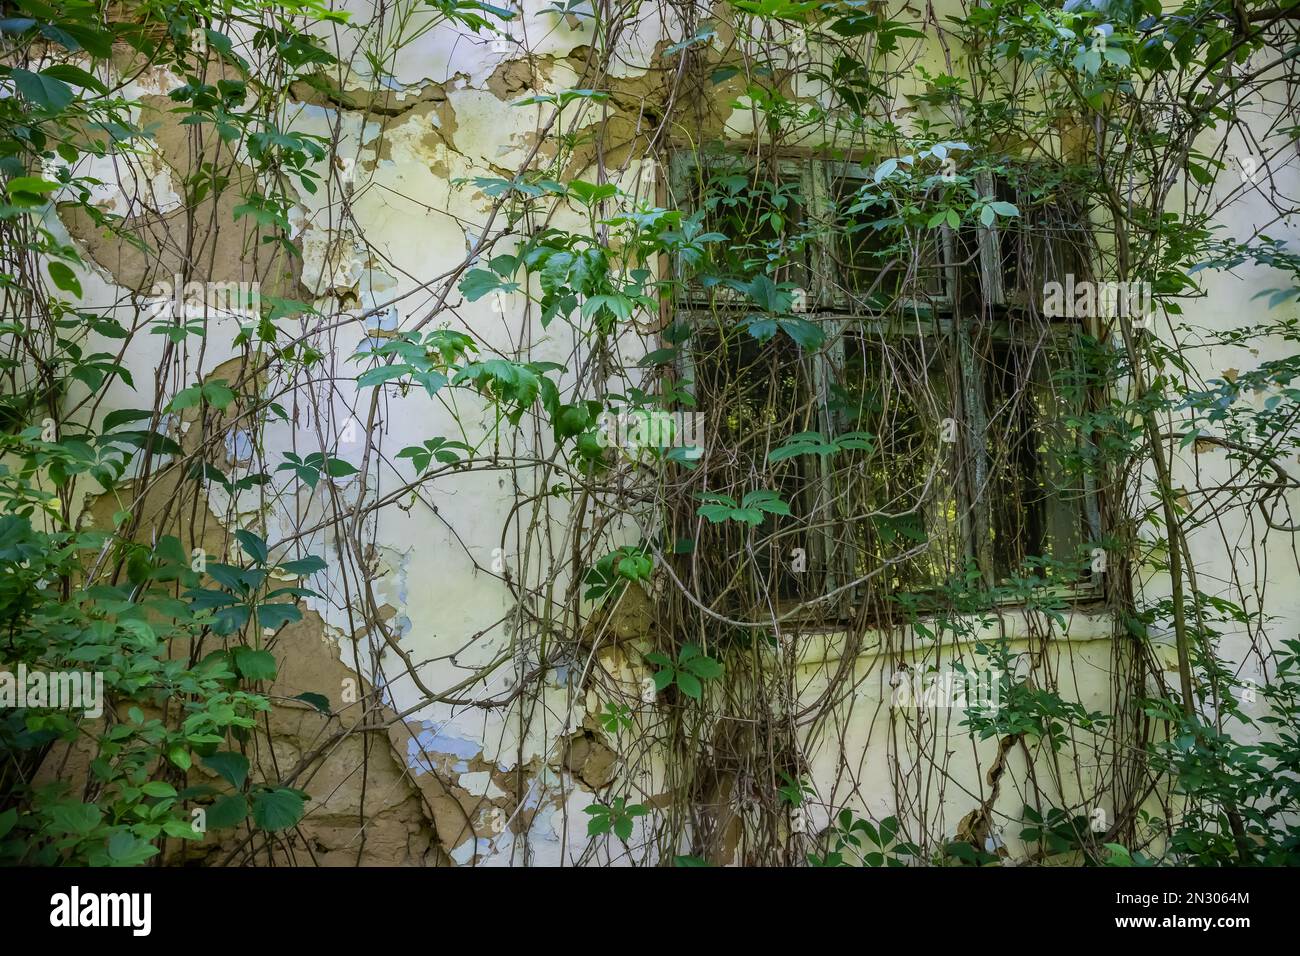 window in an abandoned house cracked vegetation Stock Photo